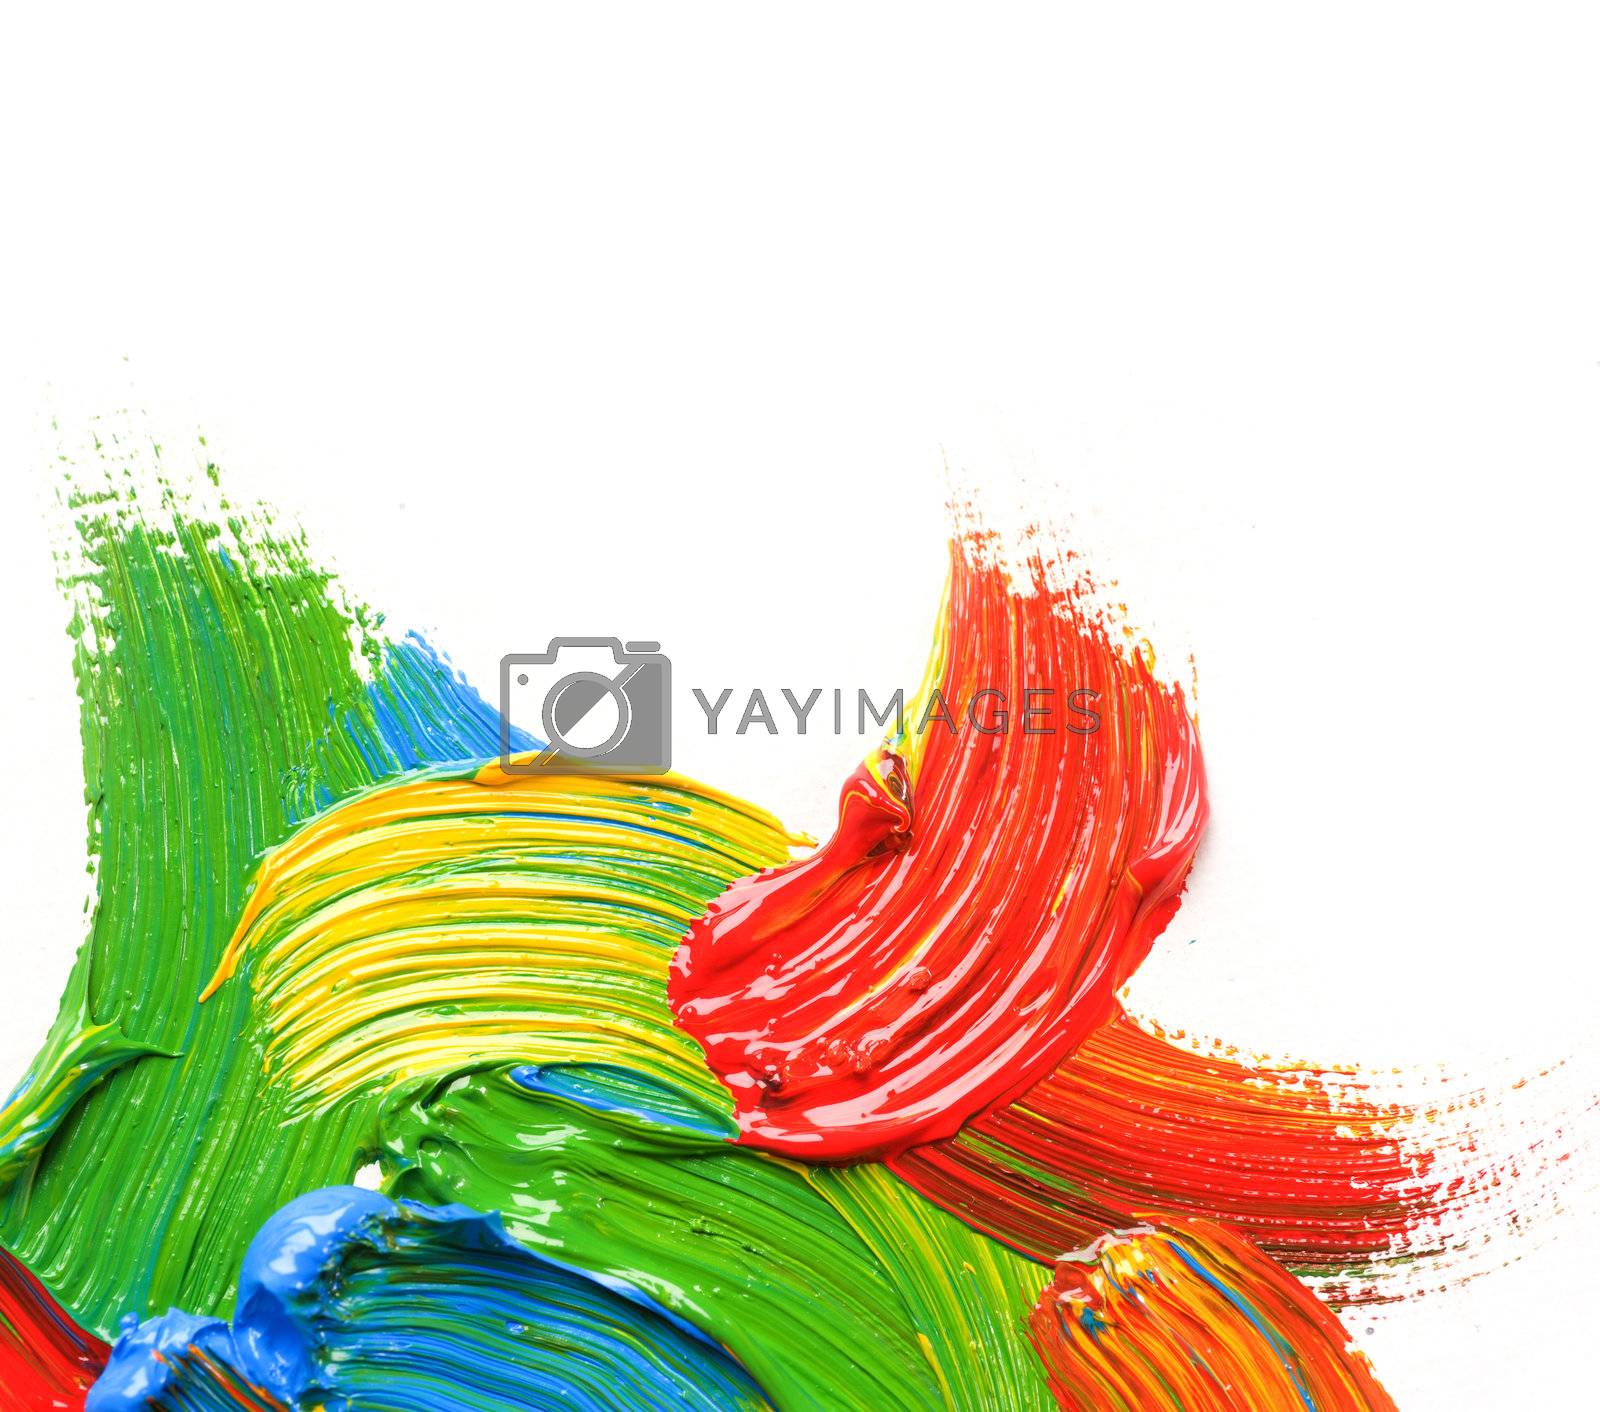 Royalty free image of Paint by SubbotinaA